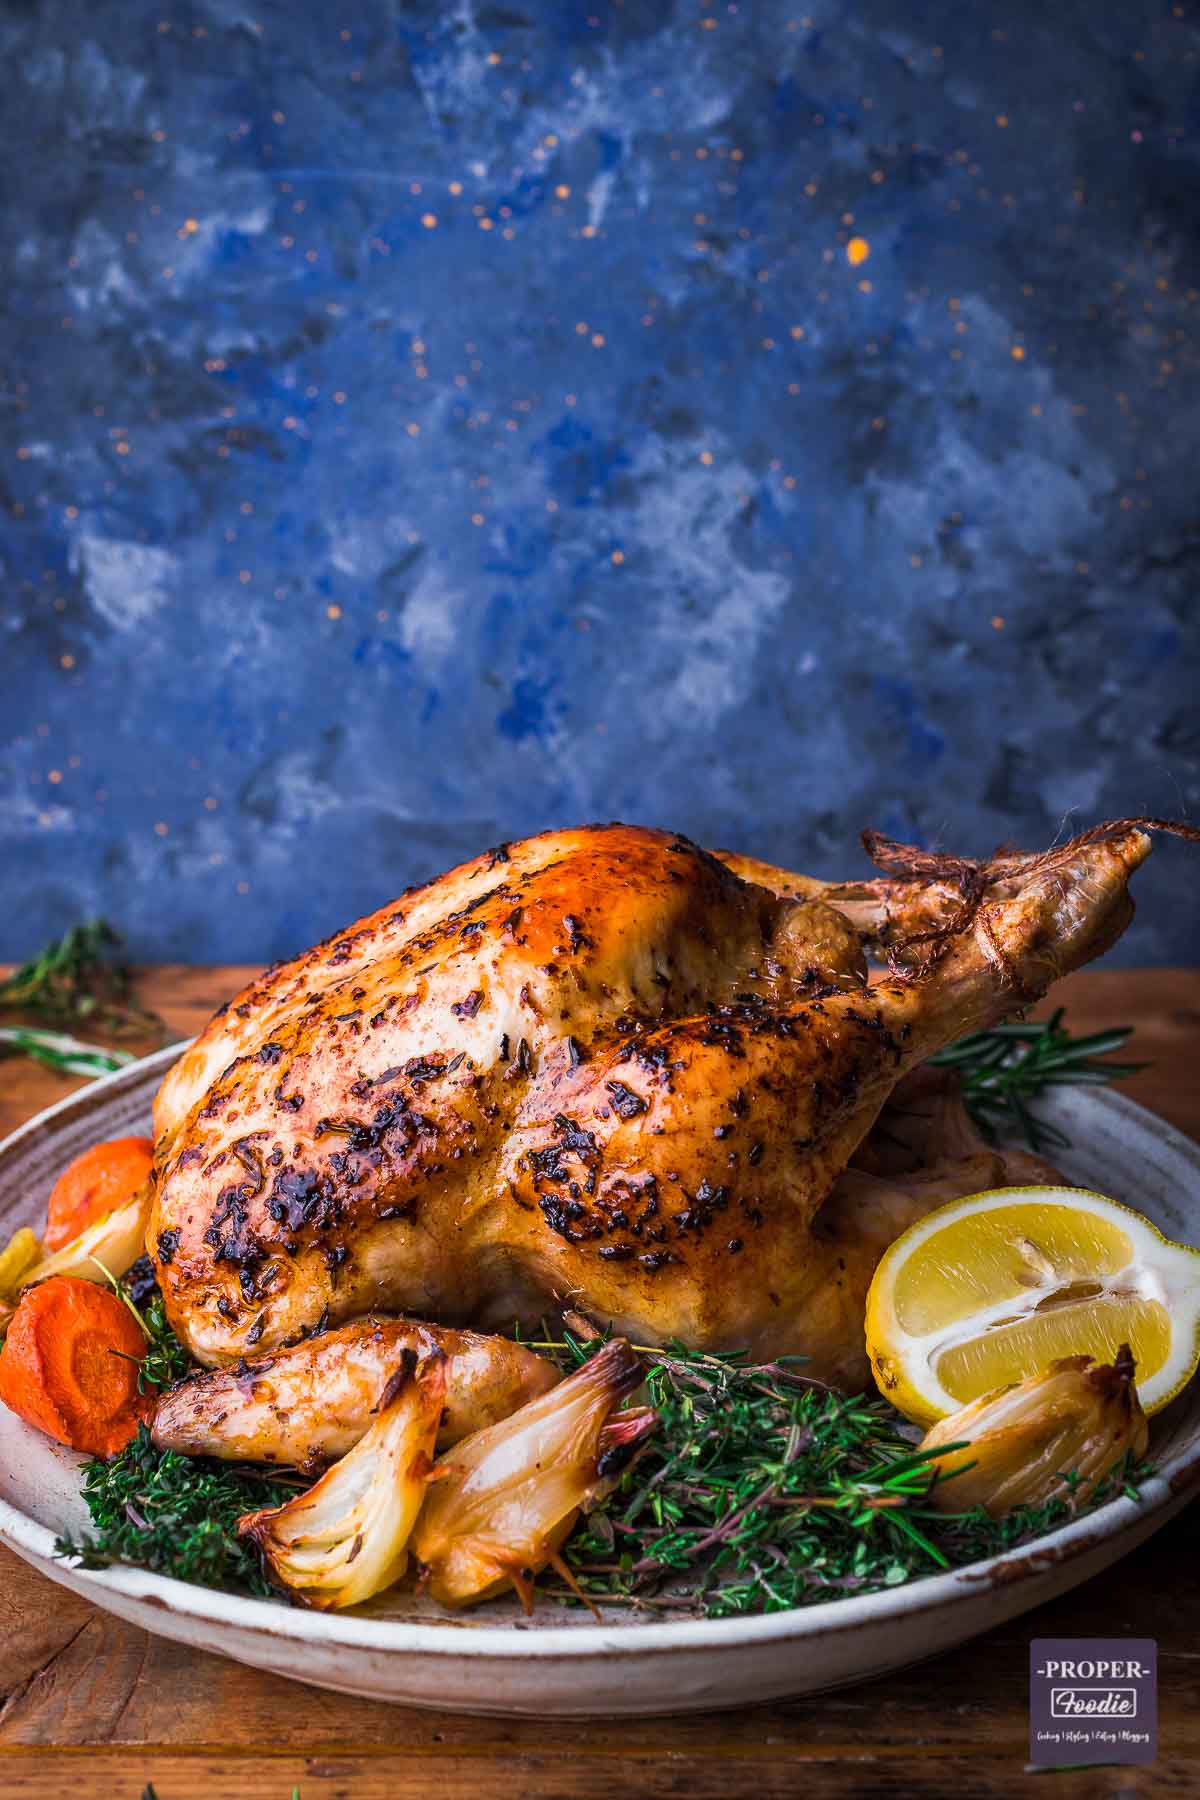 Whole roast chicken with golden skin served on a large plate surrounded by roast carrots, onions and fresh herbs.